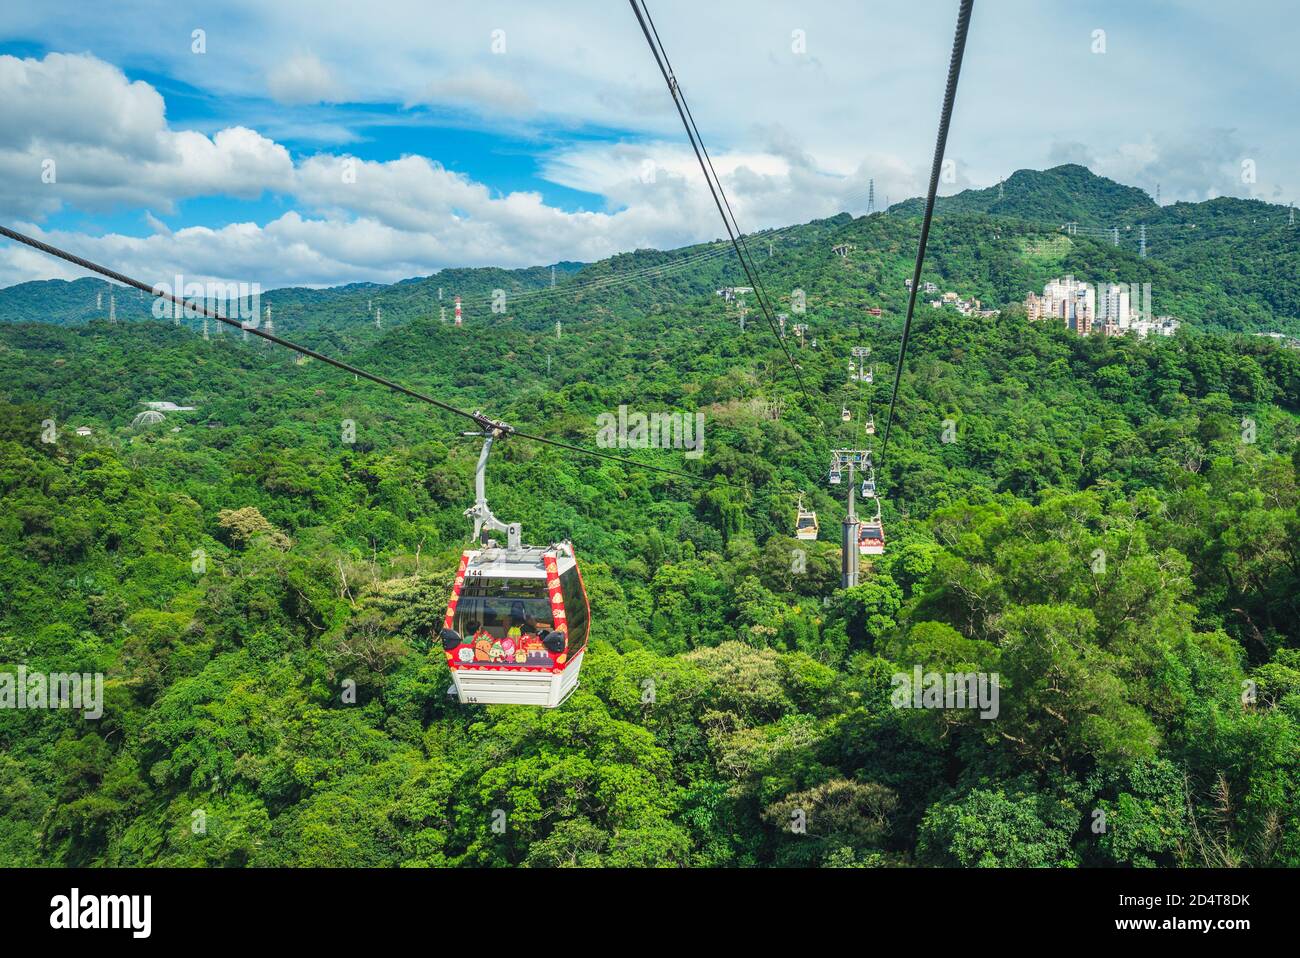 August 18, 2020: Maokong Gondola, a gondola lift transportation system in Taipei, Taiwan. It was opened on 4 July 2007 and operates between Taipei Zoo Stock Photo